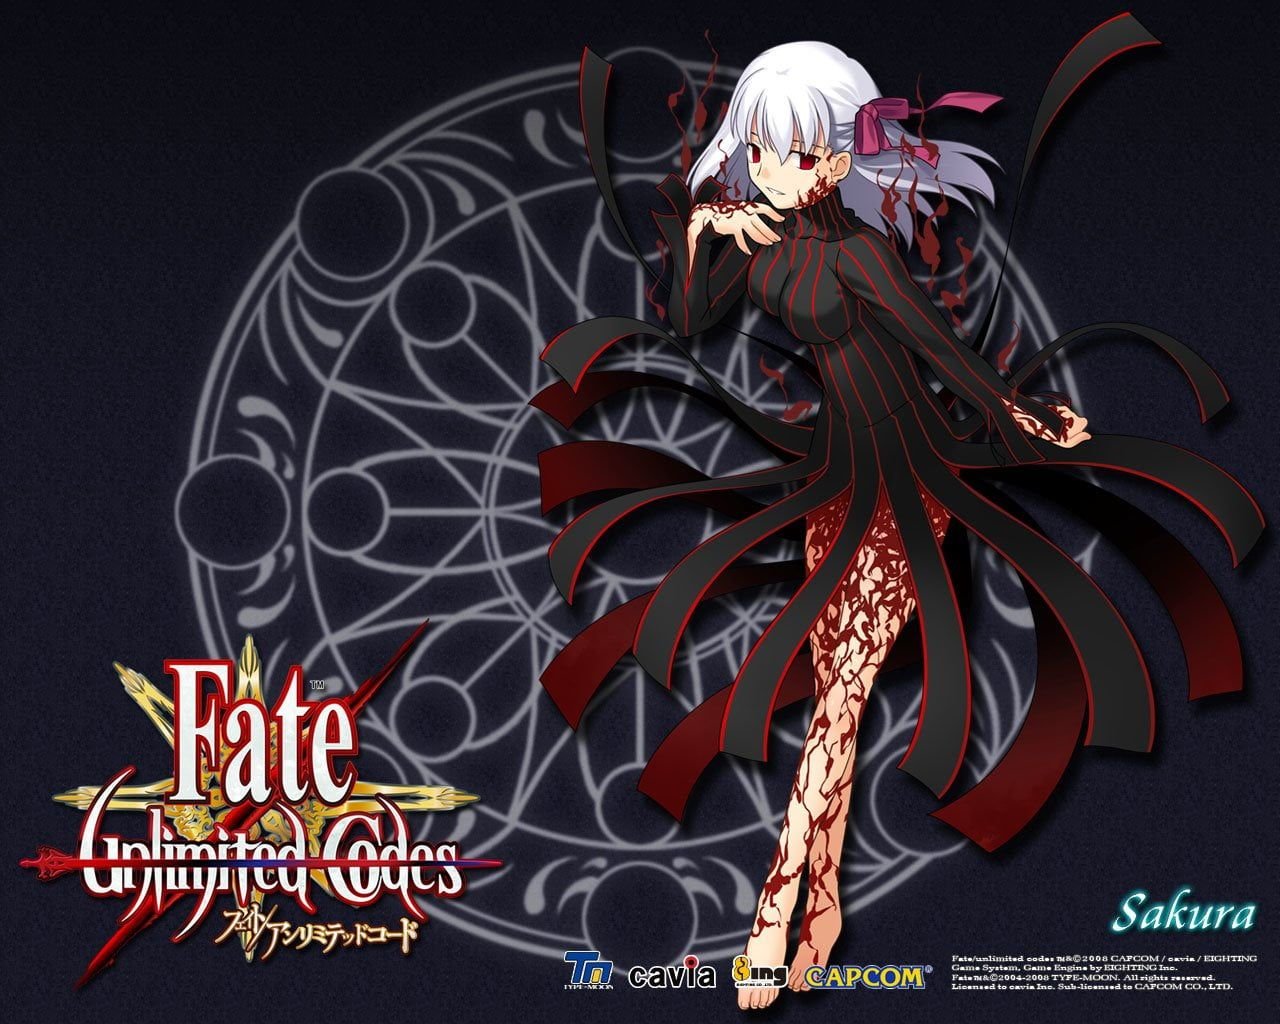 Fate Unlimited Codes High Definition Wallpaper 